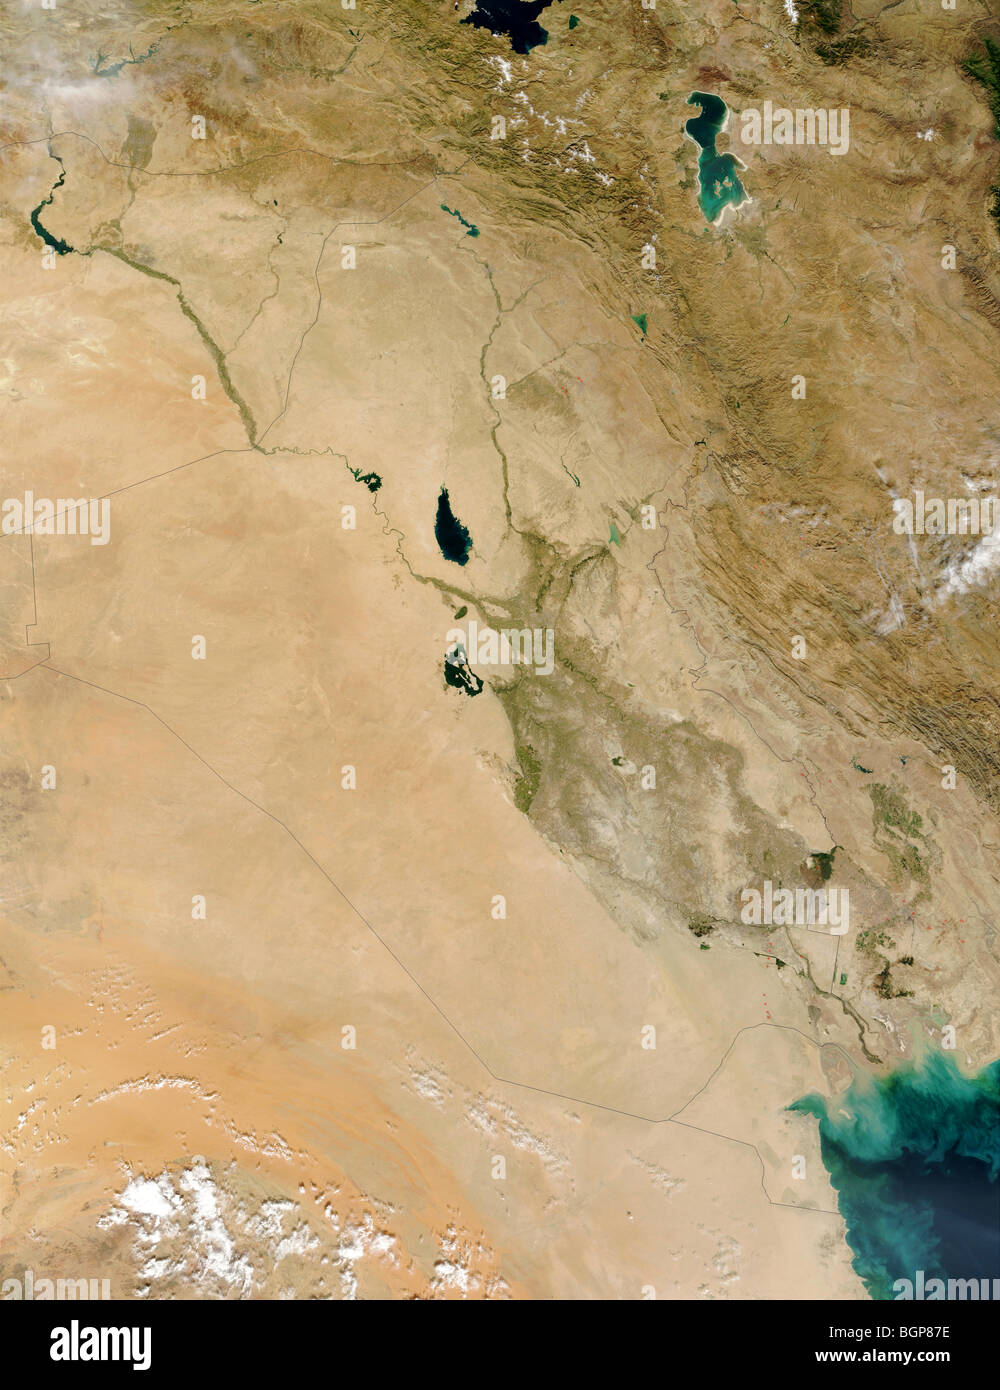 Satellite image of Iraq and the middle East Stock Photo